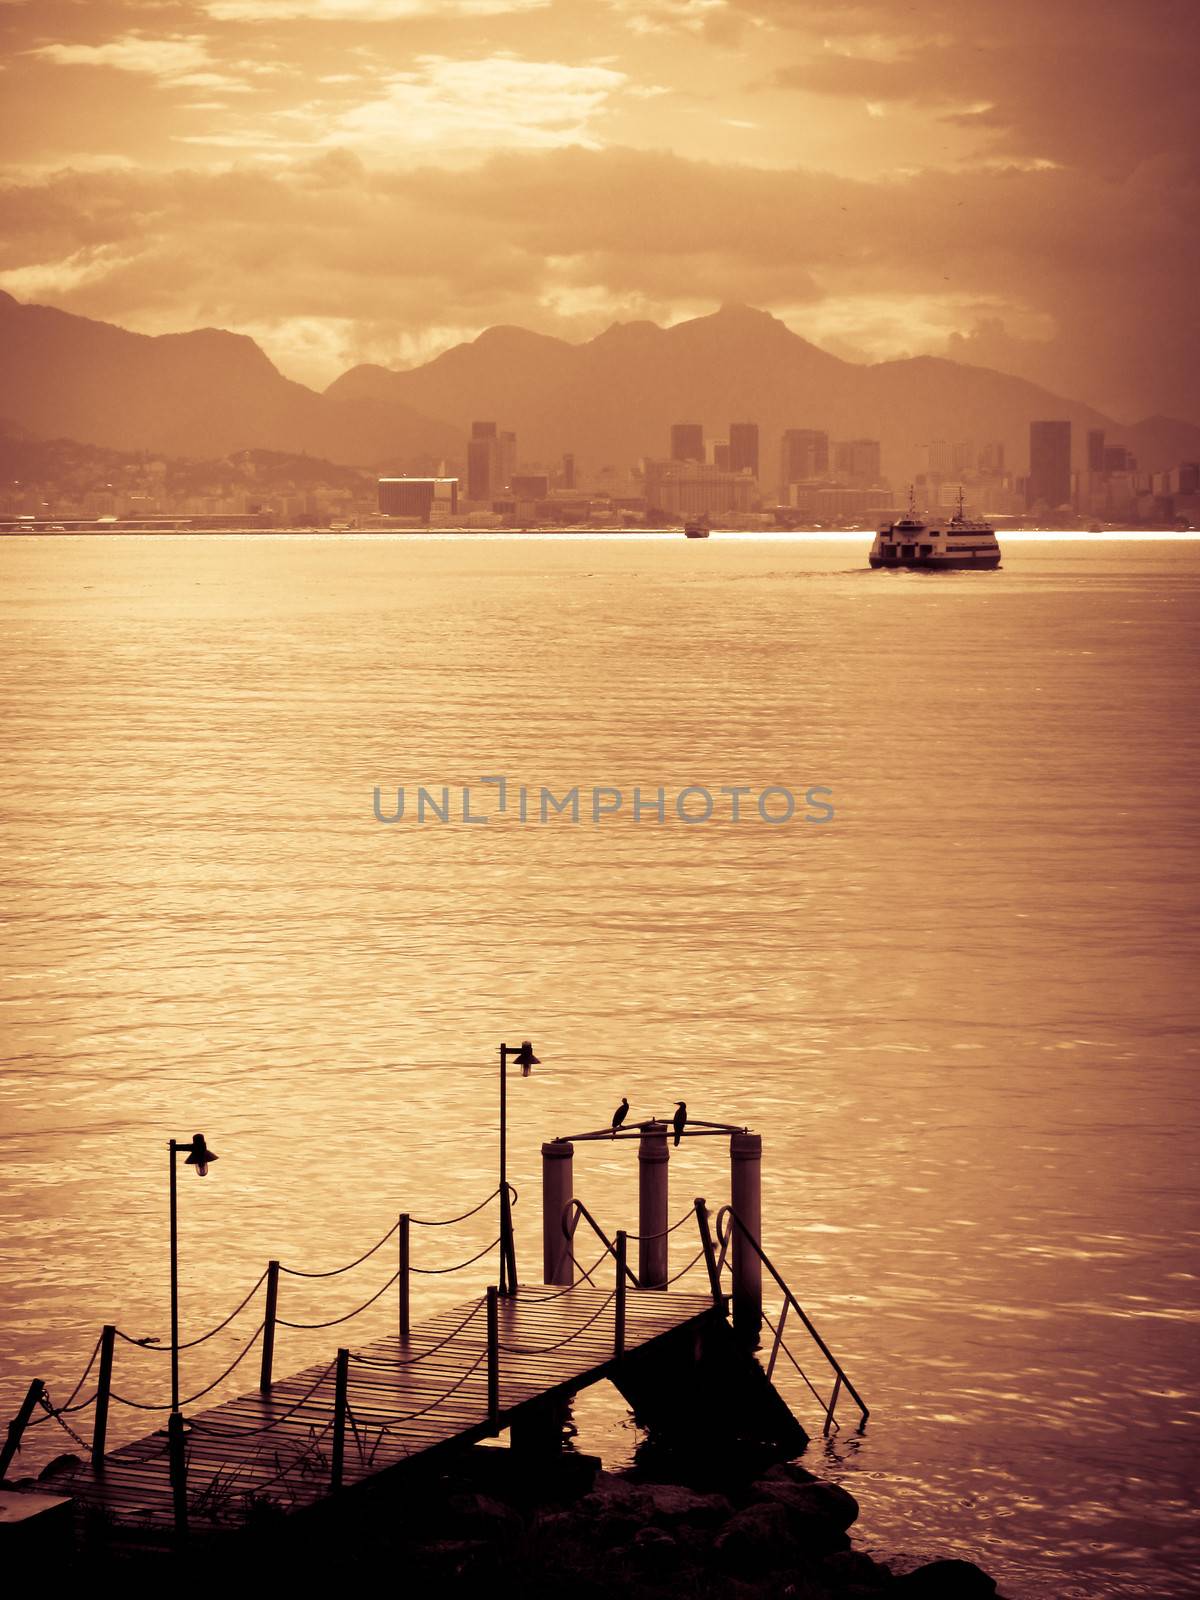 Golden sunset over Rio de Janeiro city skyline with pier in foreground, Brazil.